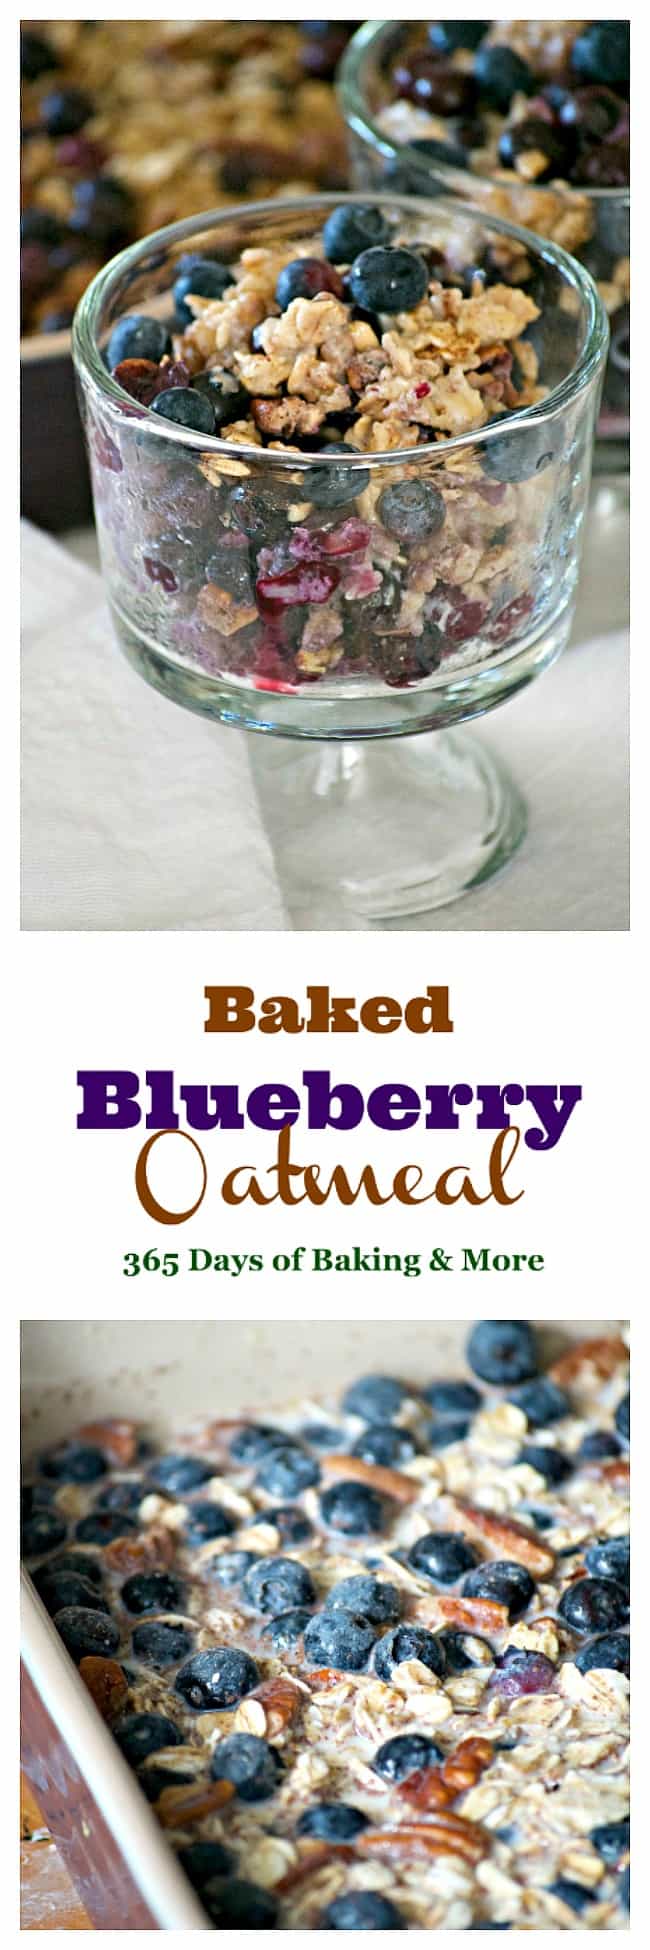 This Baked Blueberry Oatmeal with oats, pecans, cinnamon, milk, honey and blueberries is the perfect for a chilly winter's day. Don't go stovetop, bake it!